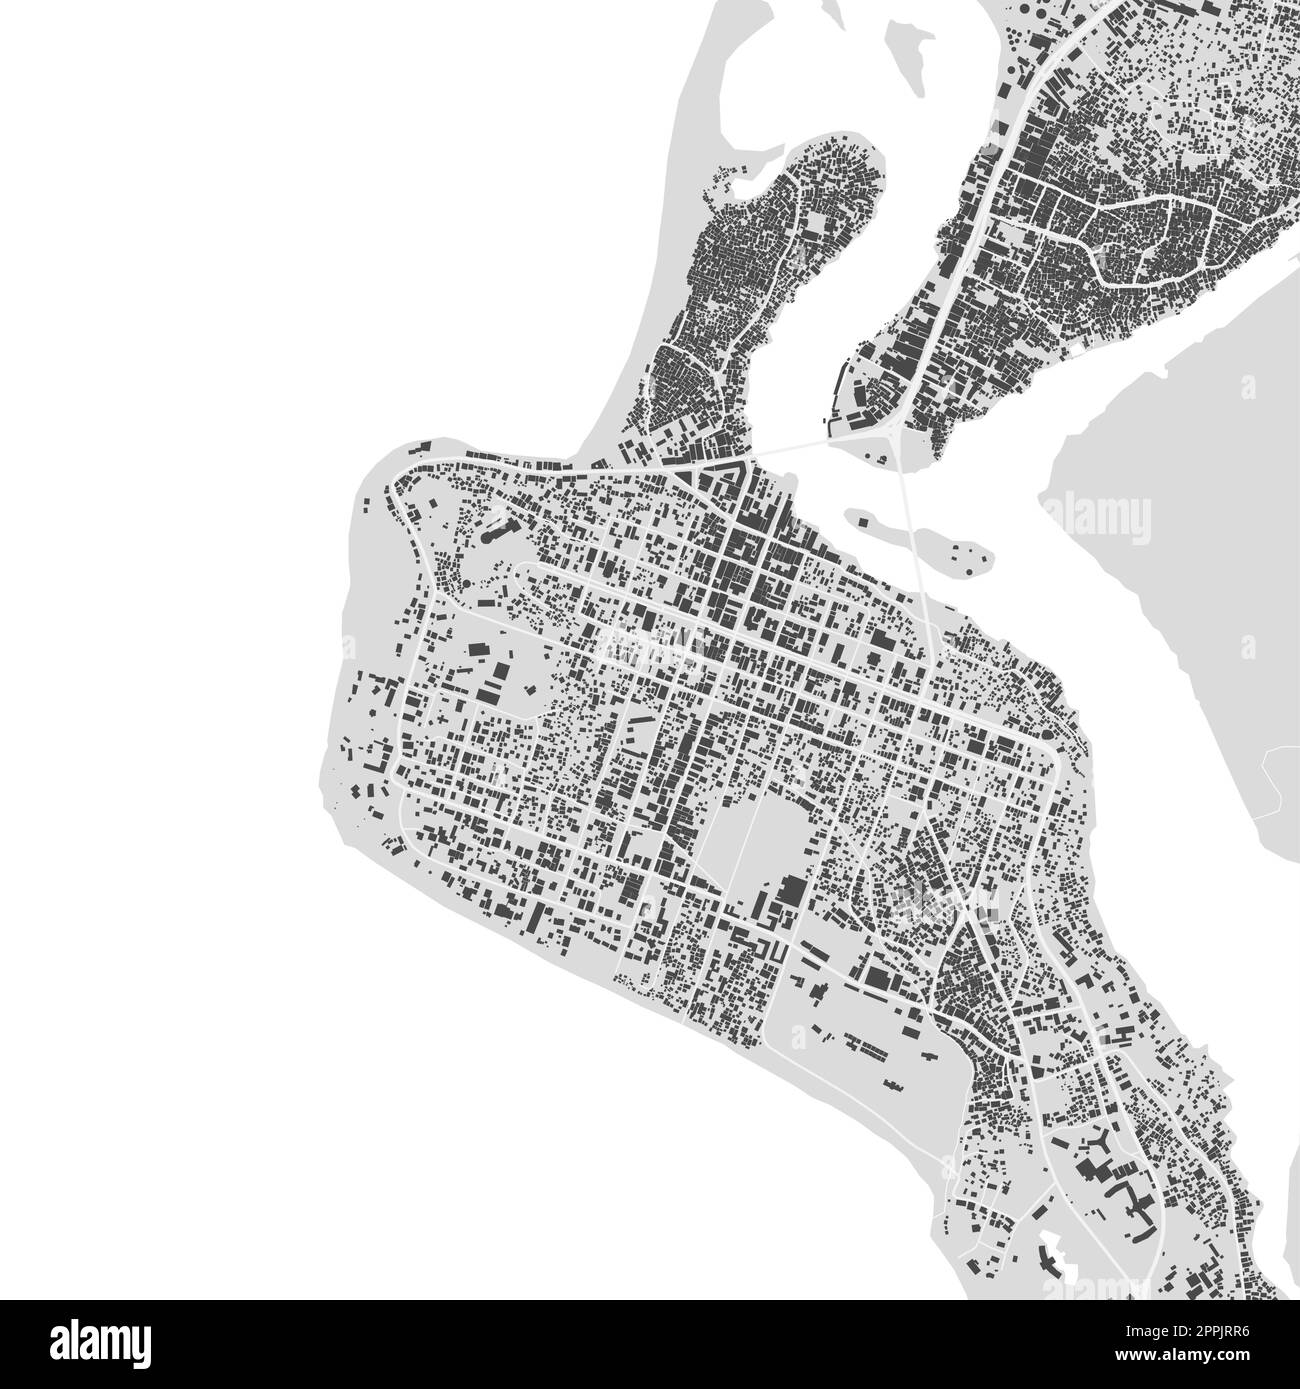 Urban city vector map of Monrovia, Liberia. Vector illustration, Monrovia map grayscale black and white art poster. Road map image with roads, metropo Stock Vector